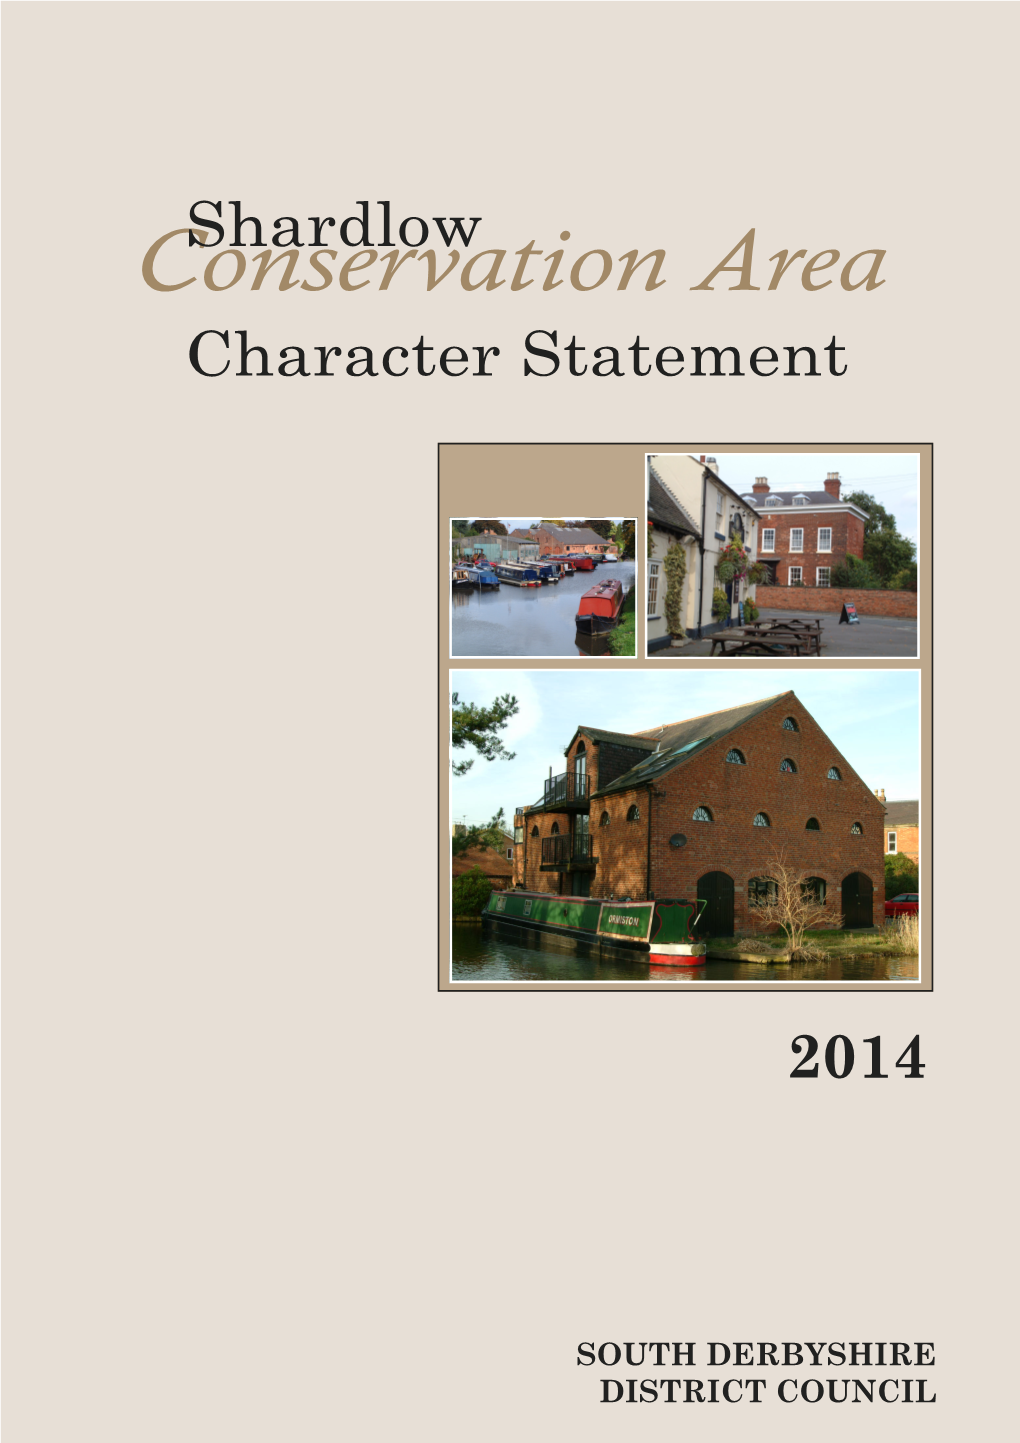 Shardlow Conservation Area Character Statement